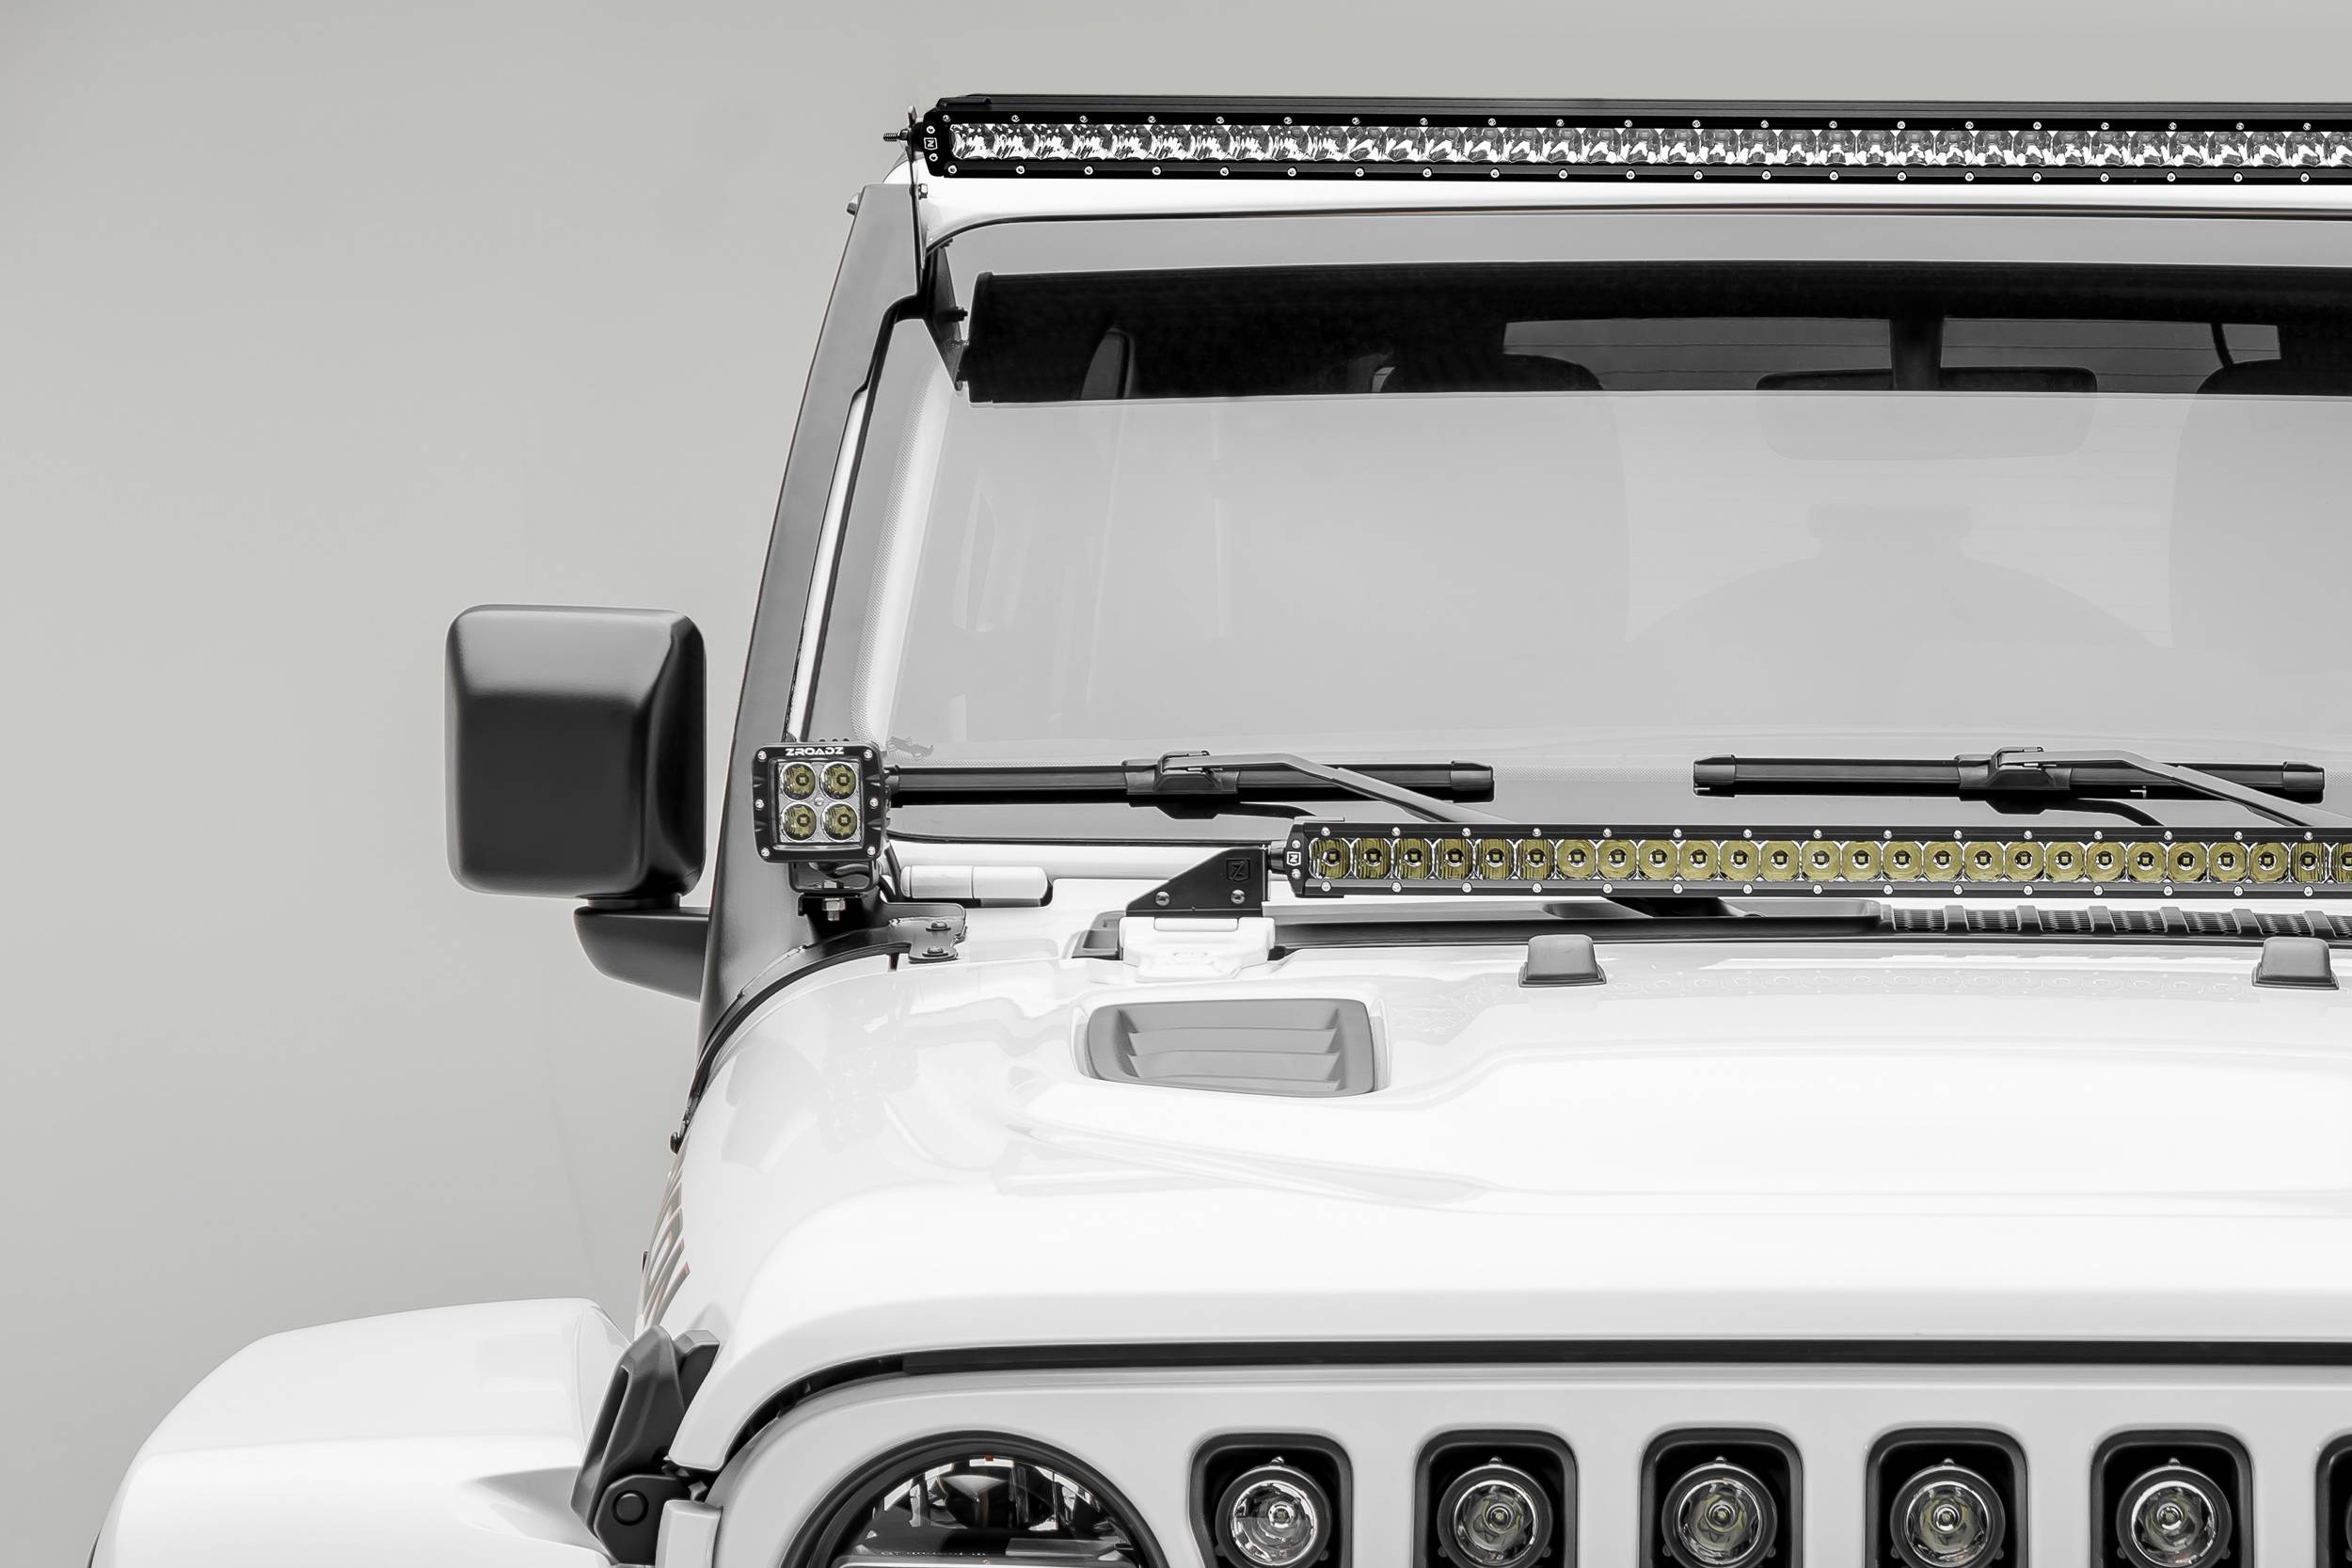 ZROADZ OFF ROAD PRODUCTS - Jeep JL, Gladiator Front Roof LED Kit with (1) 50 Inch LED Straight Single Row Slim Light Bar and (2) 3 Inch LED Pod Lights - Part # Z374831-KIT2S